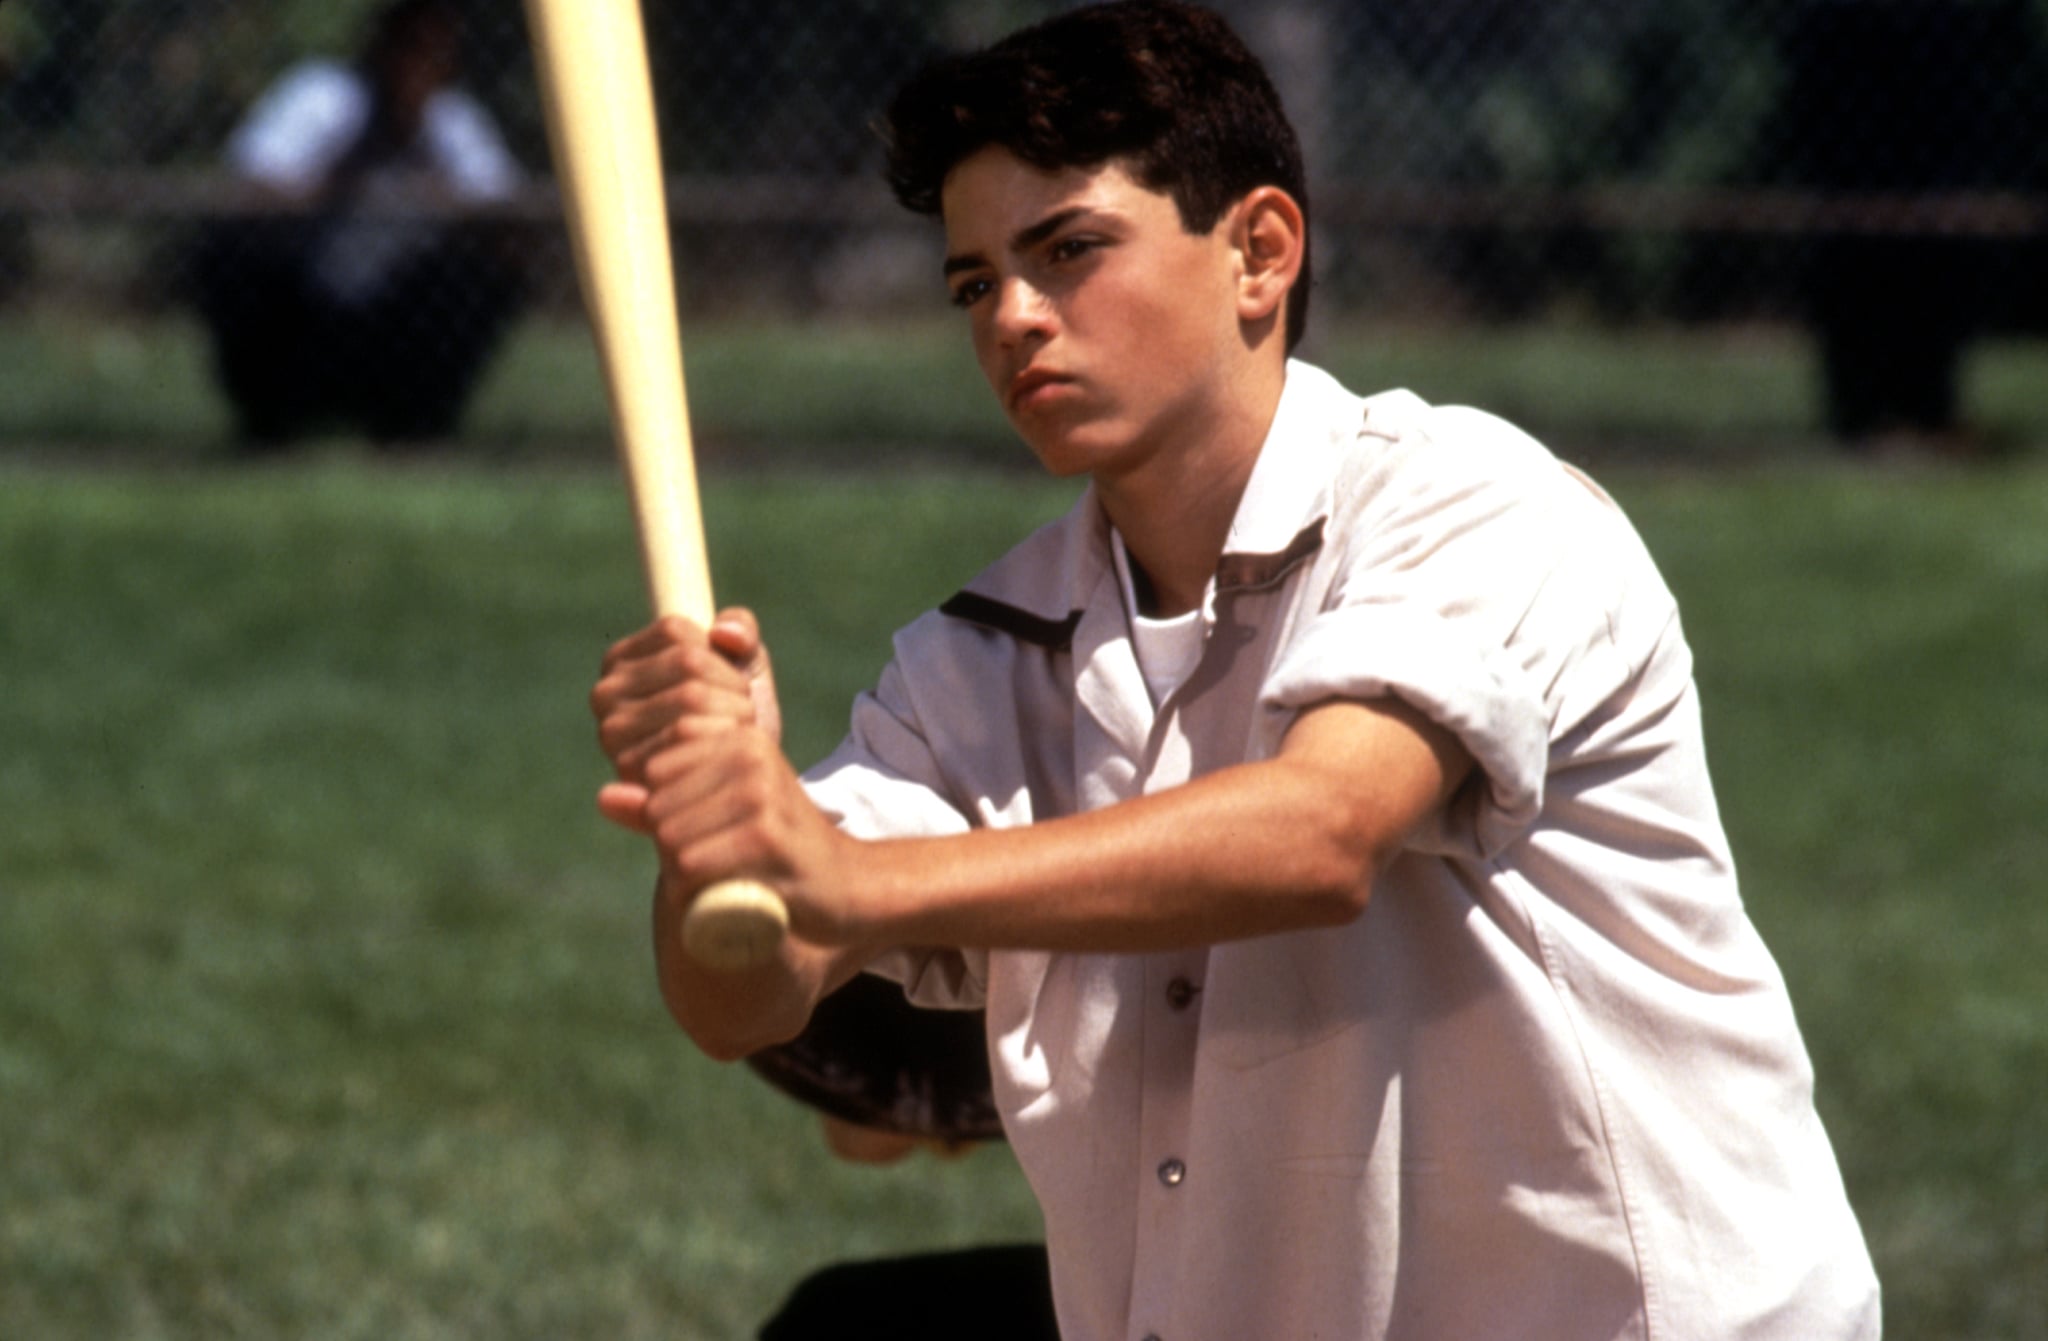 Mike Vitar as Benny The Jet Rodriguez